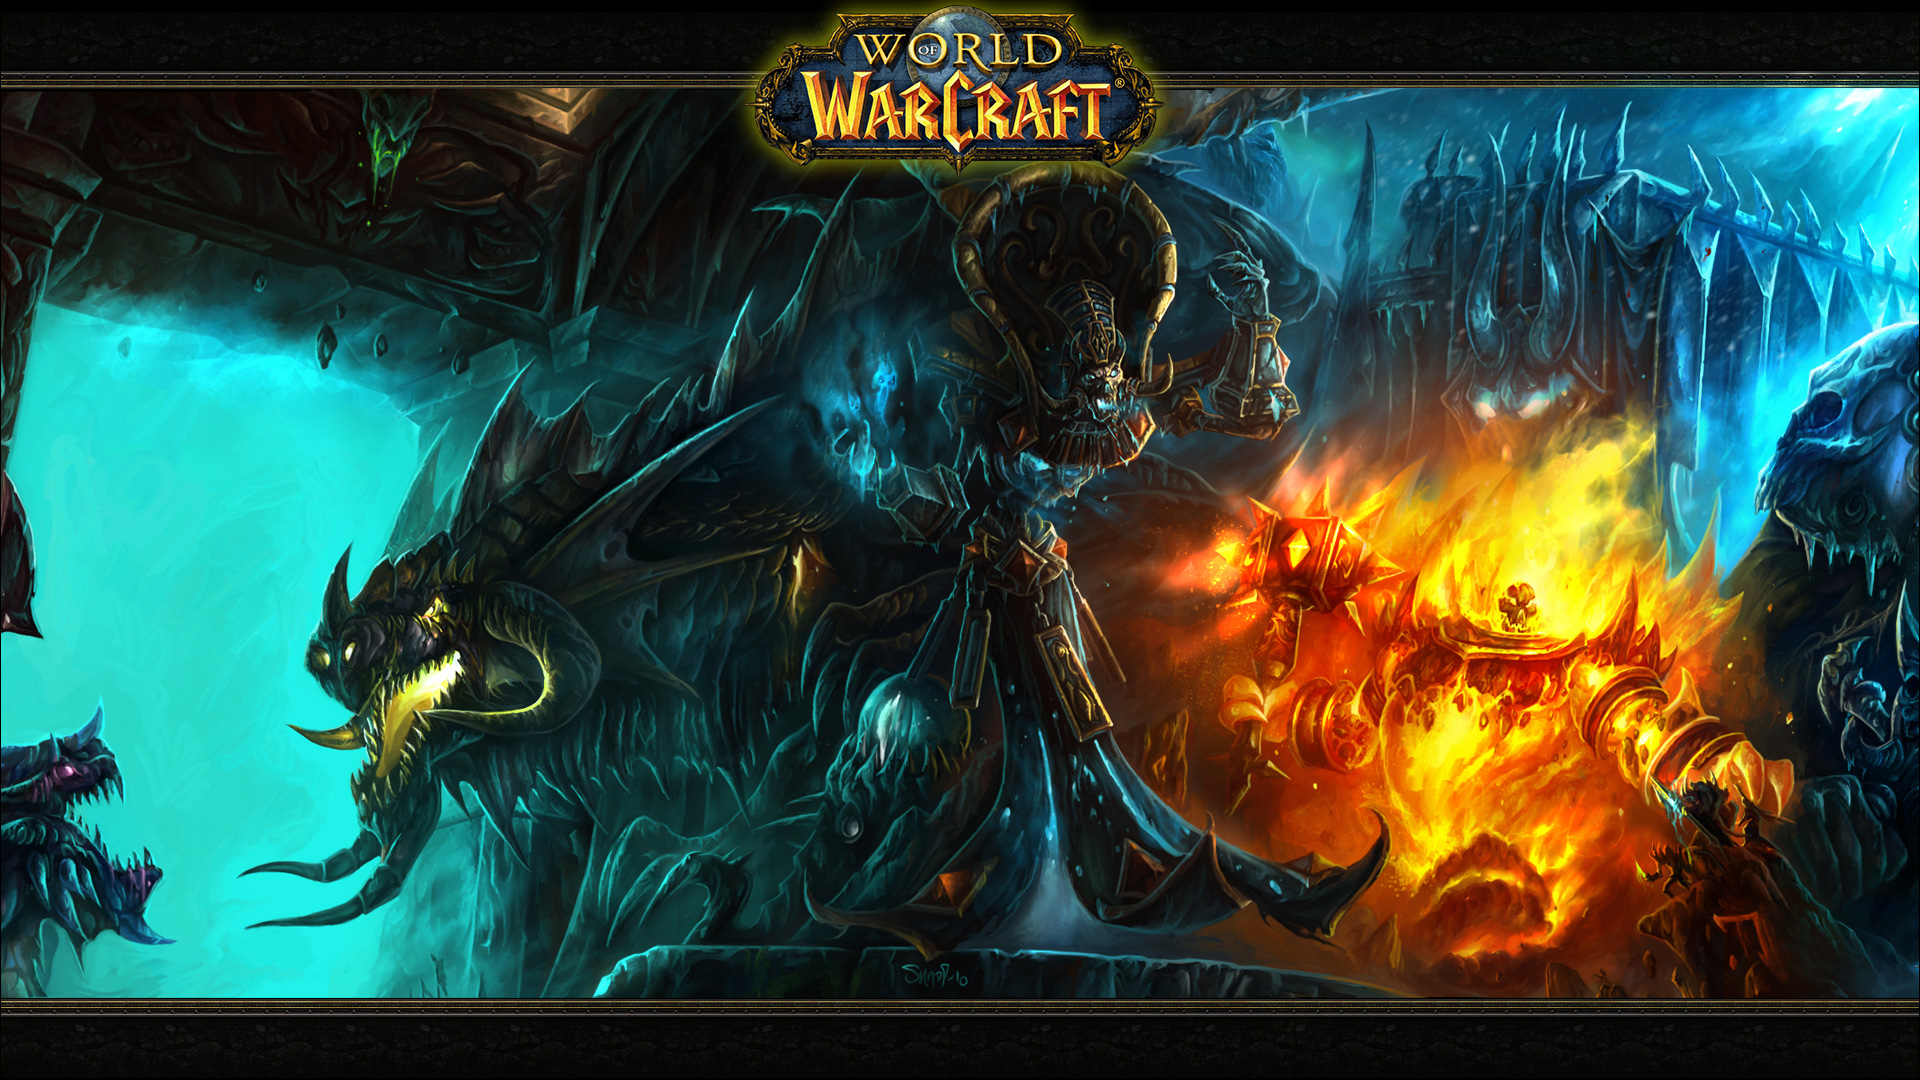 World of Warcraft Wallpapers HD Free Download.